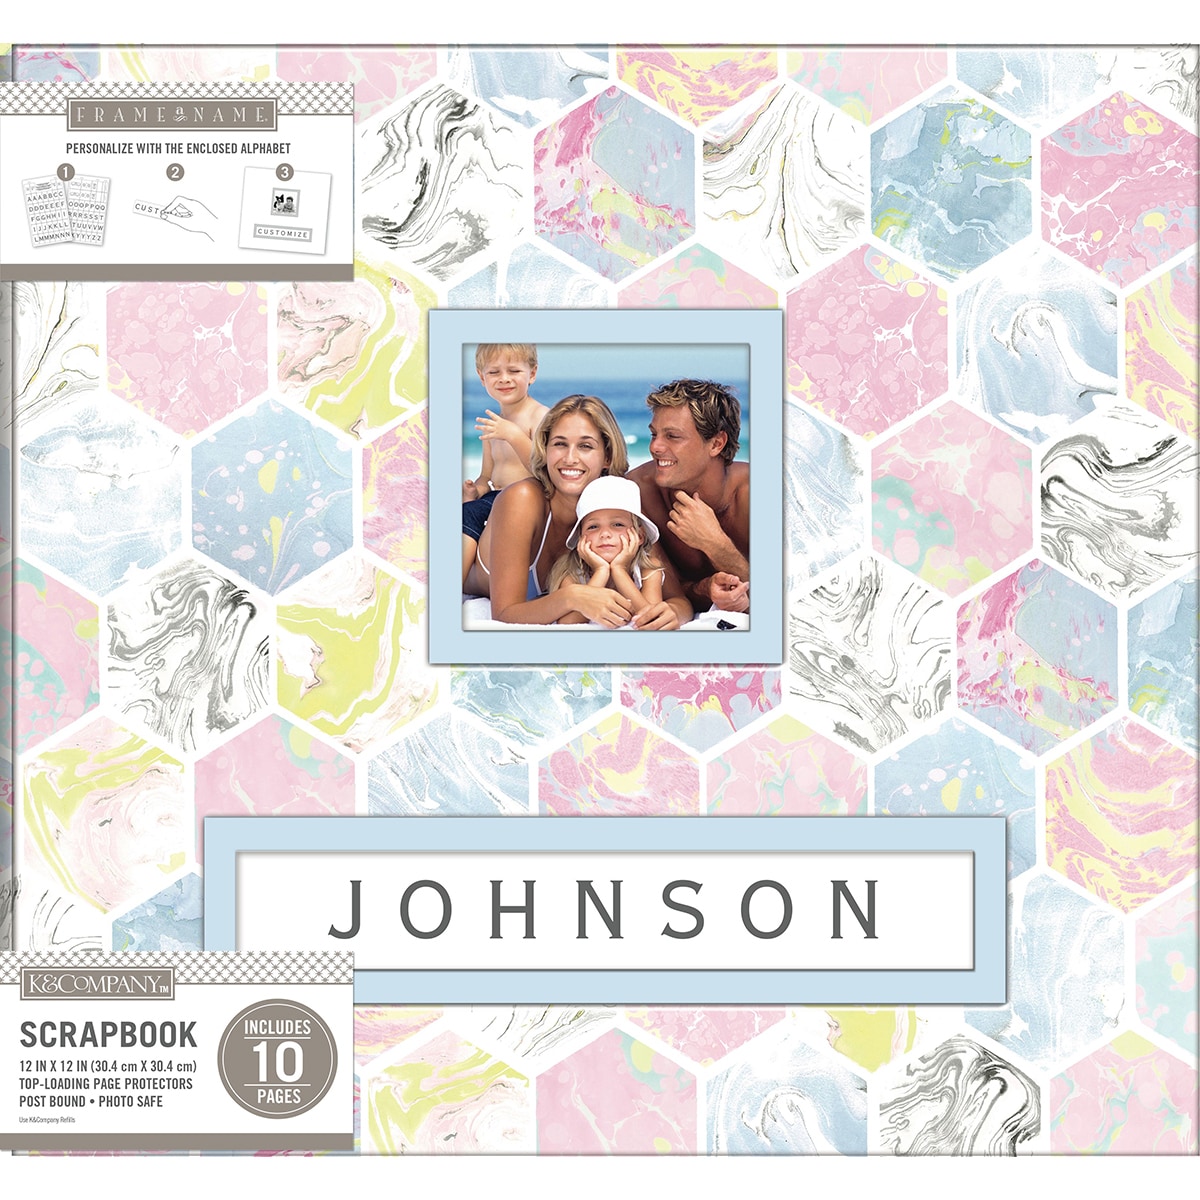 K&Co Scrapbook 12x12 Frame-A-Name Marbled Hexagon - Bed